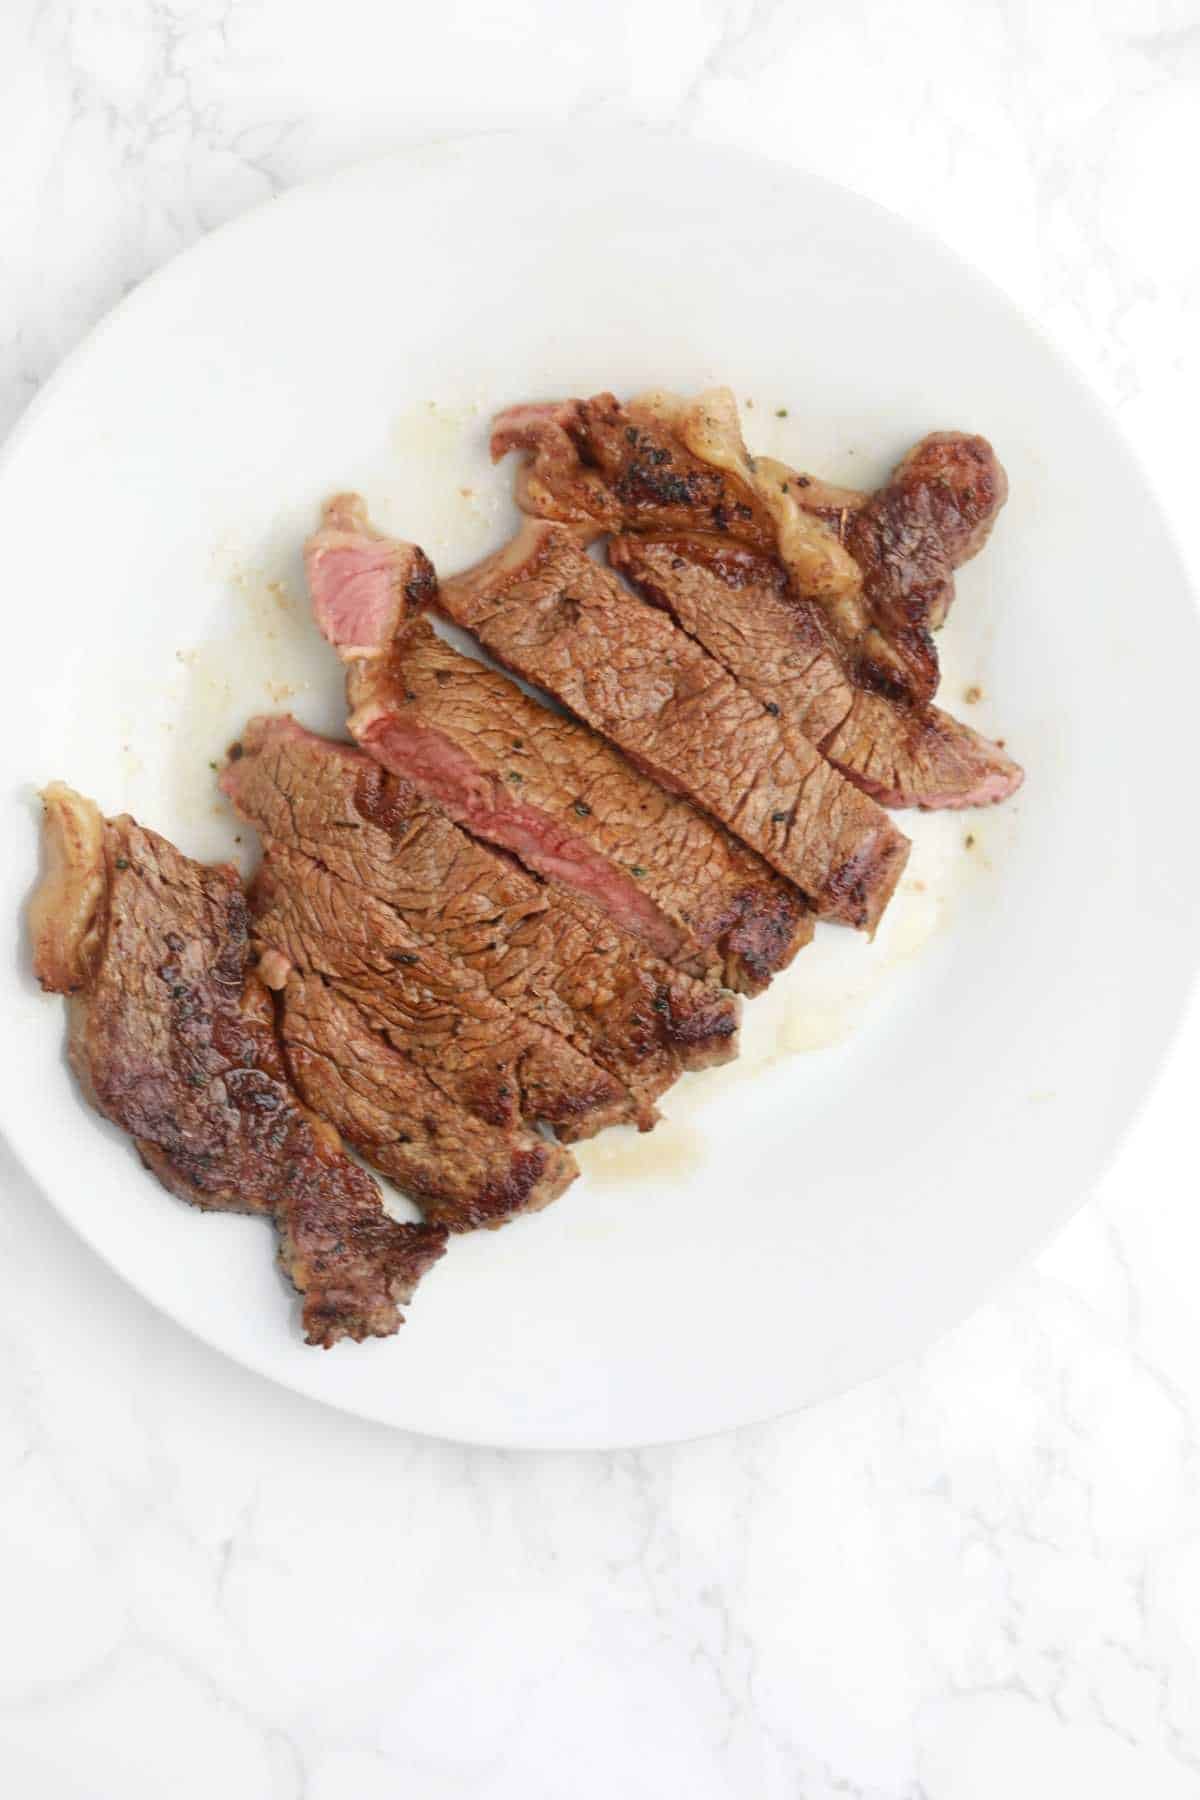 cooked and sliced steak on a white plate.